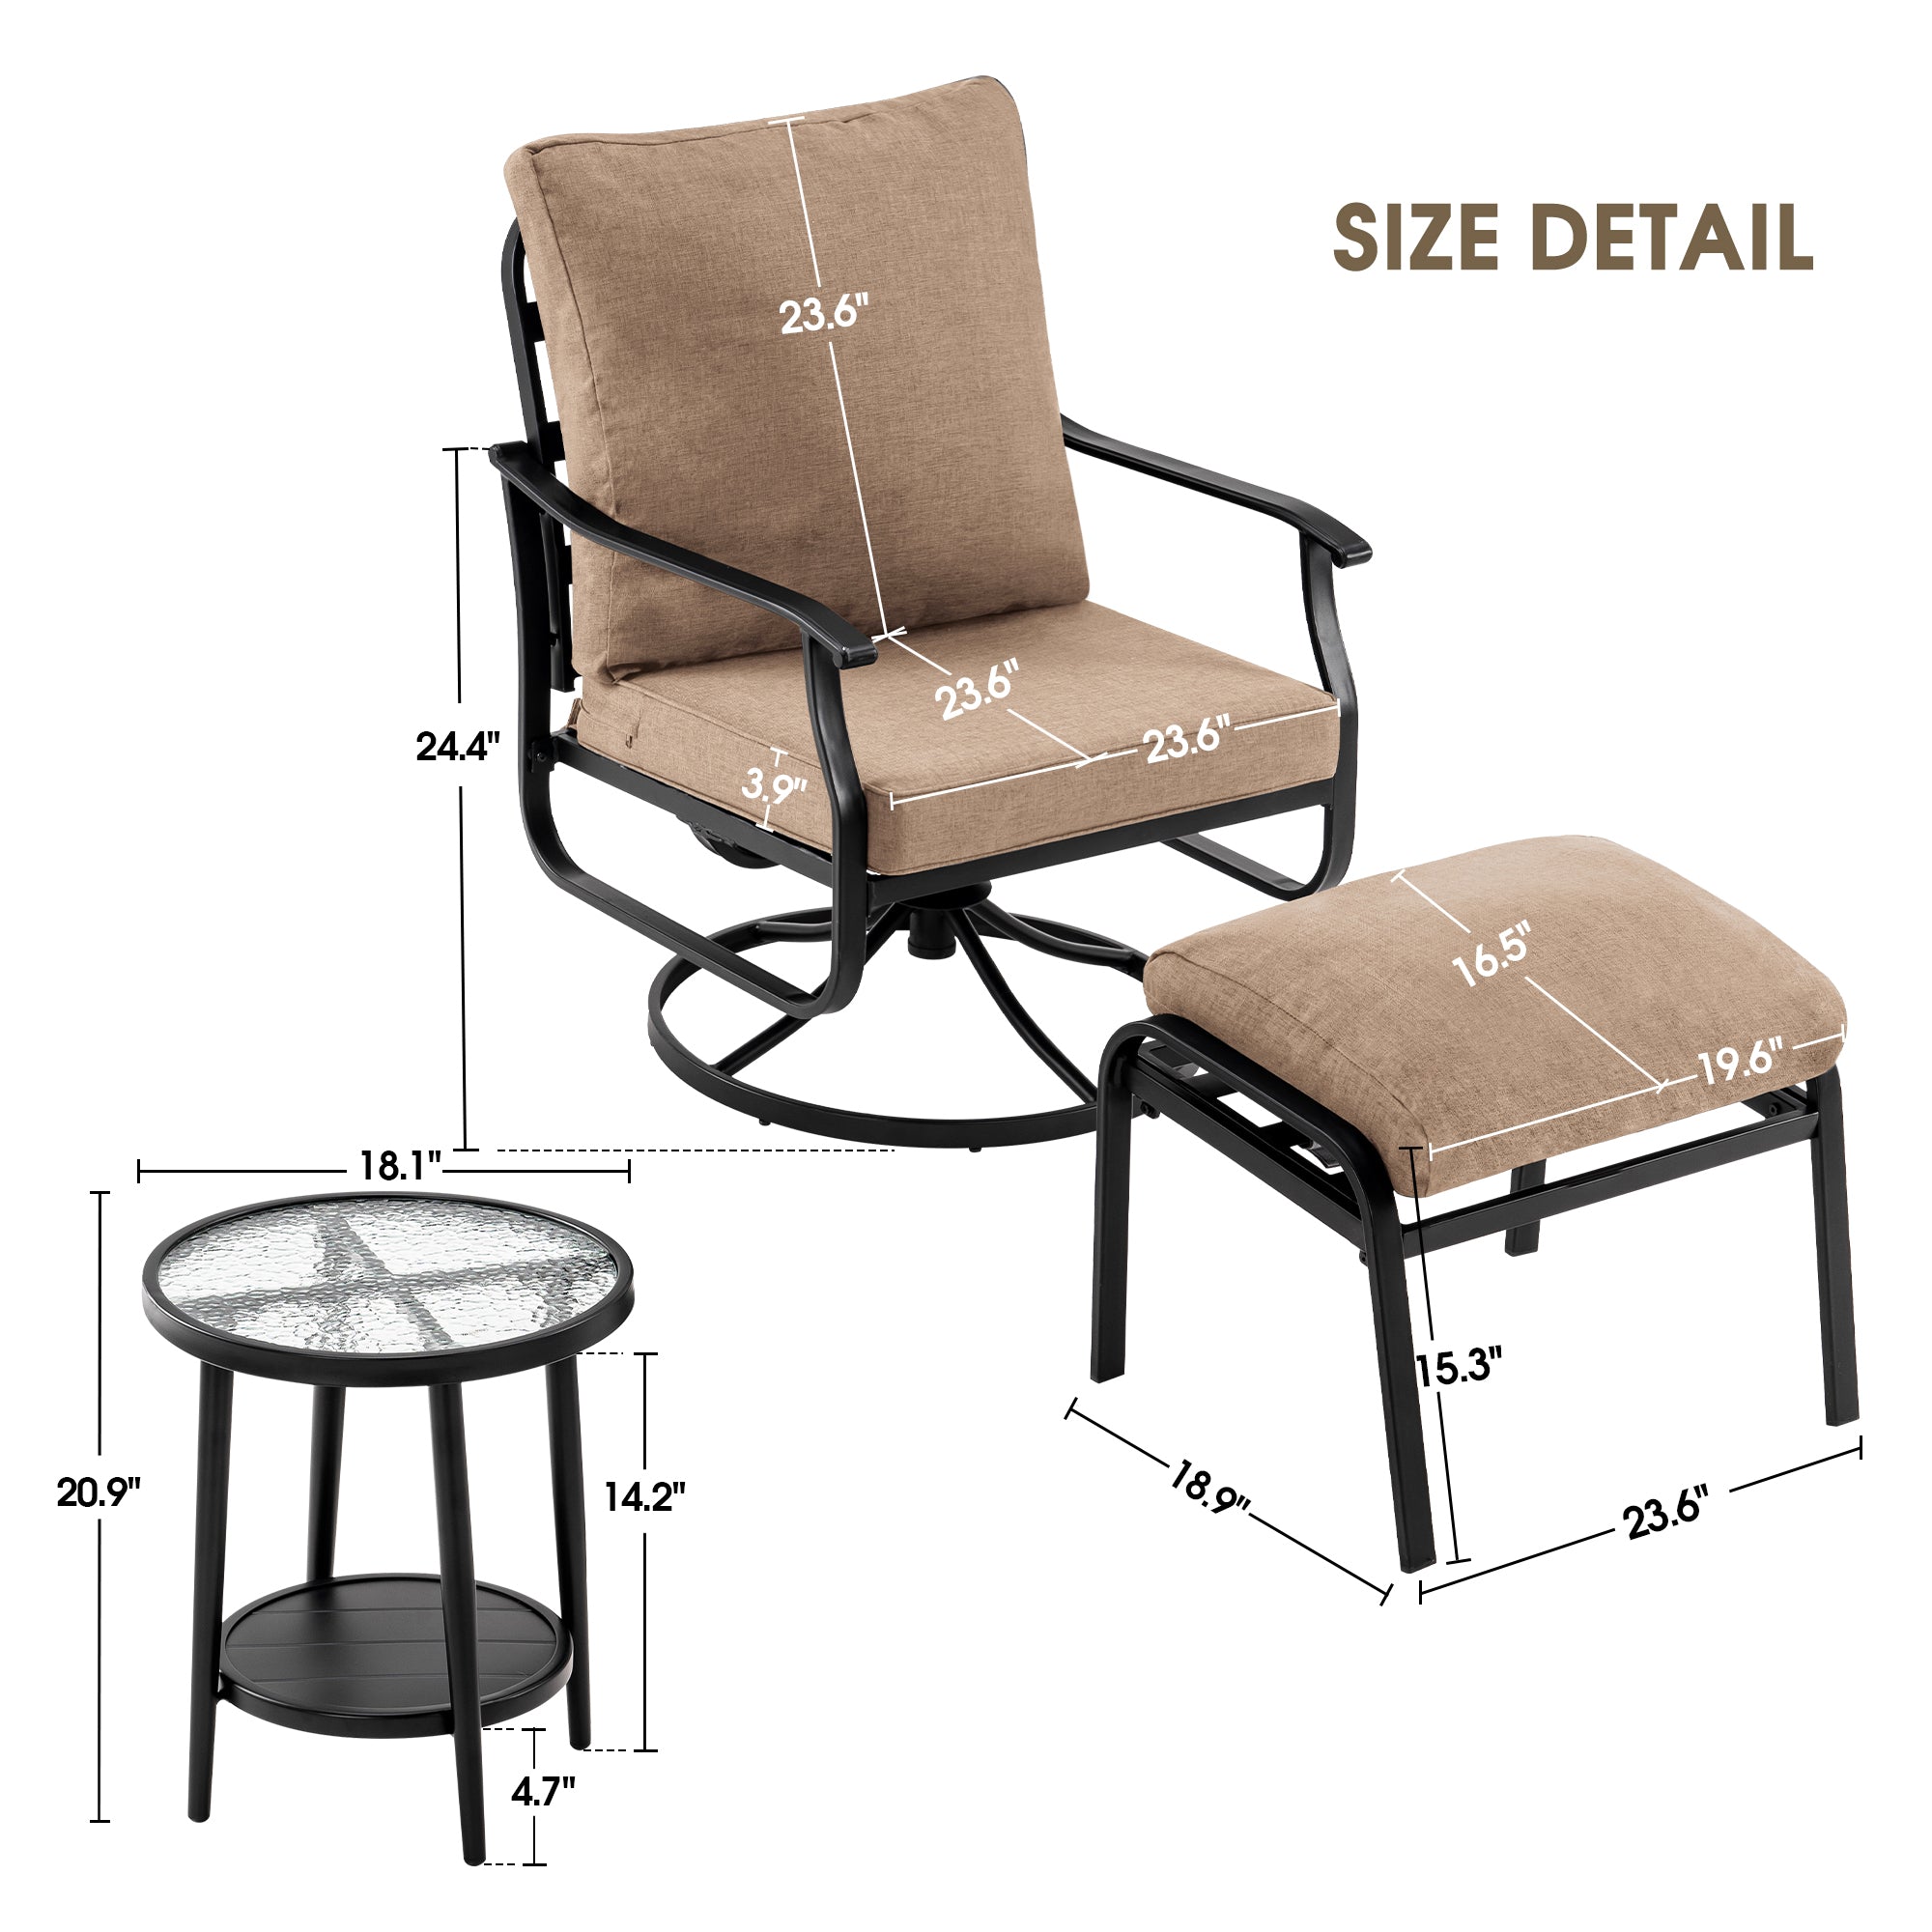 ivinta Furniture Patio Chairs Set of 3, Outdoor Metal Swivel Chairs with Side Table Thick Removable Cushions, Bistro Chair with Ottoman for Backyard, Garden, Balcony, Porch